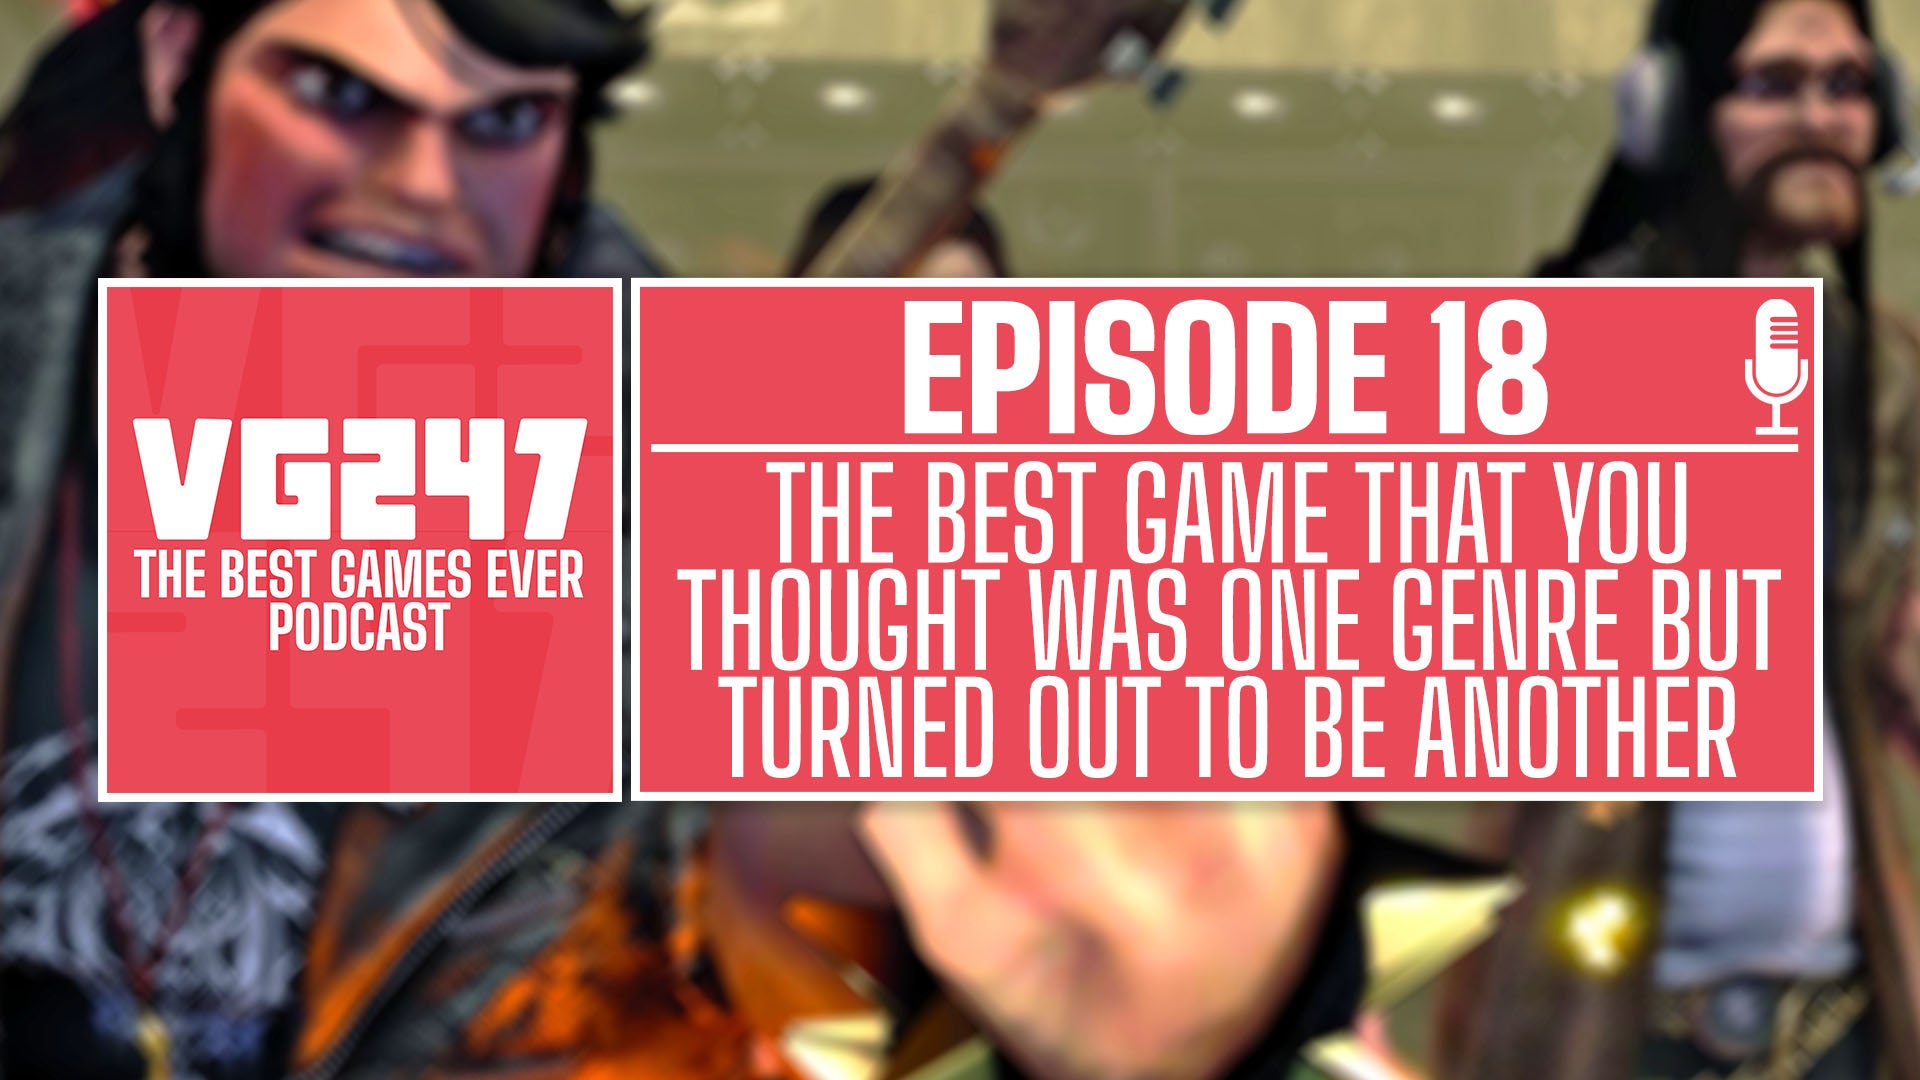 Image for VG247's The Best Games Ever Podcast �C Ep.18: The best game you thought was one genre but turned out to be another